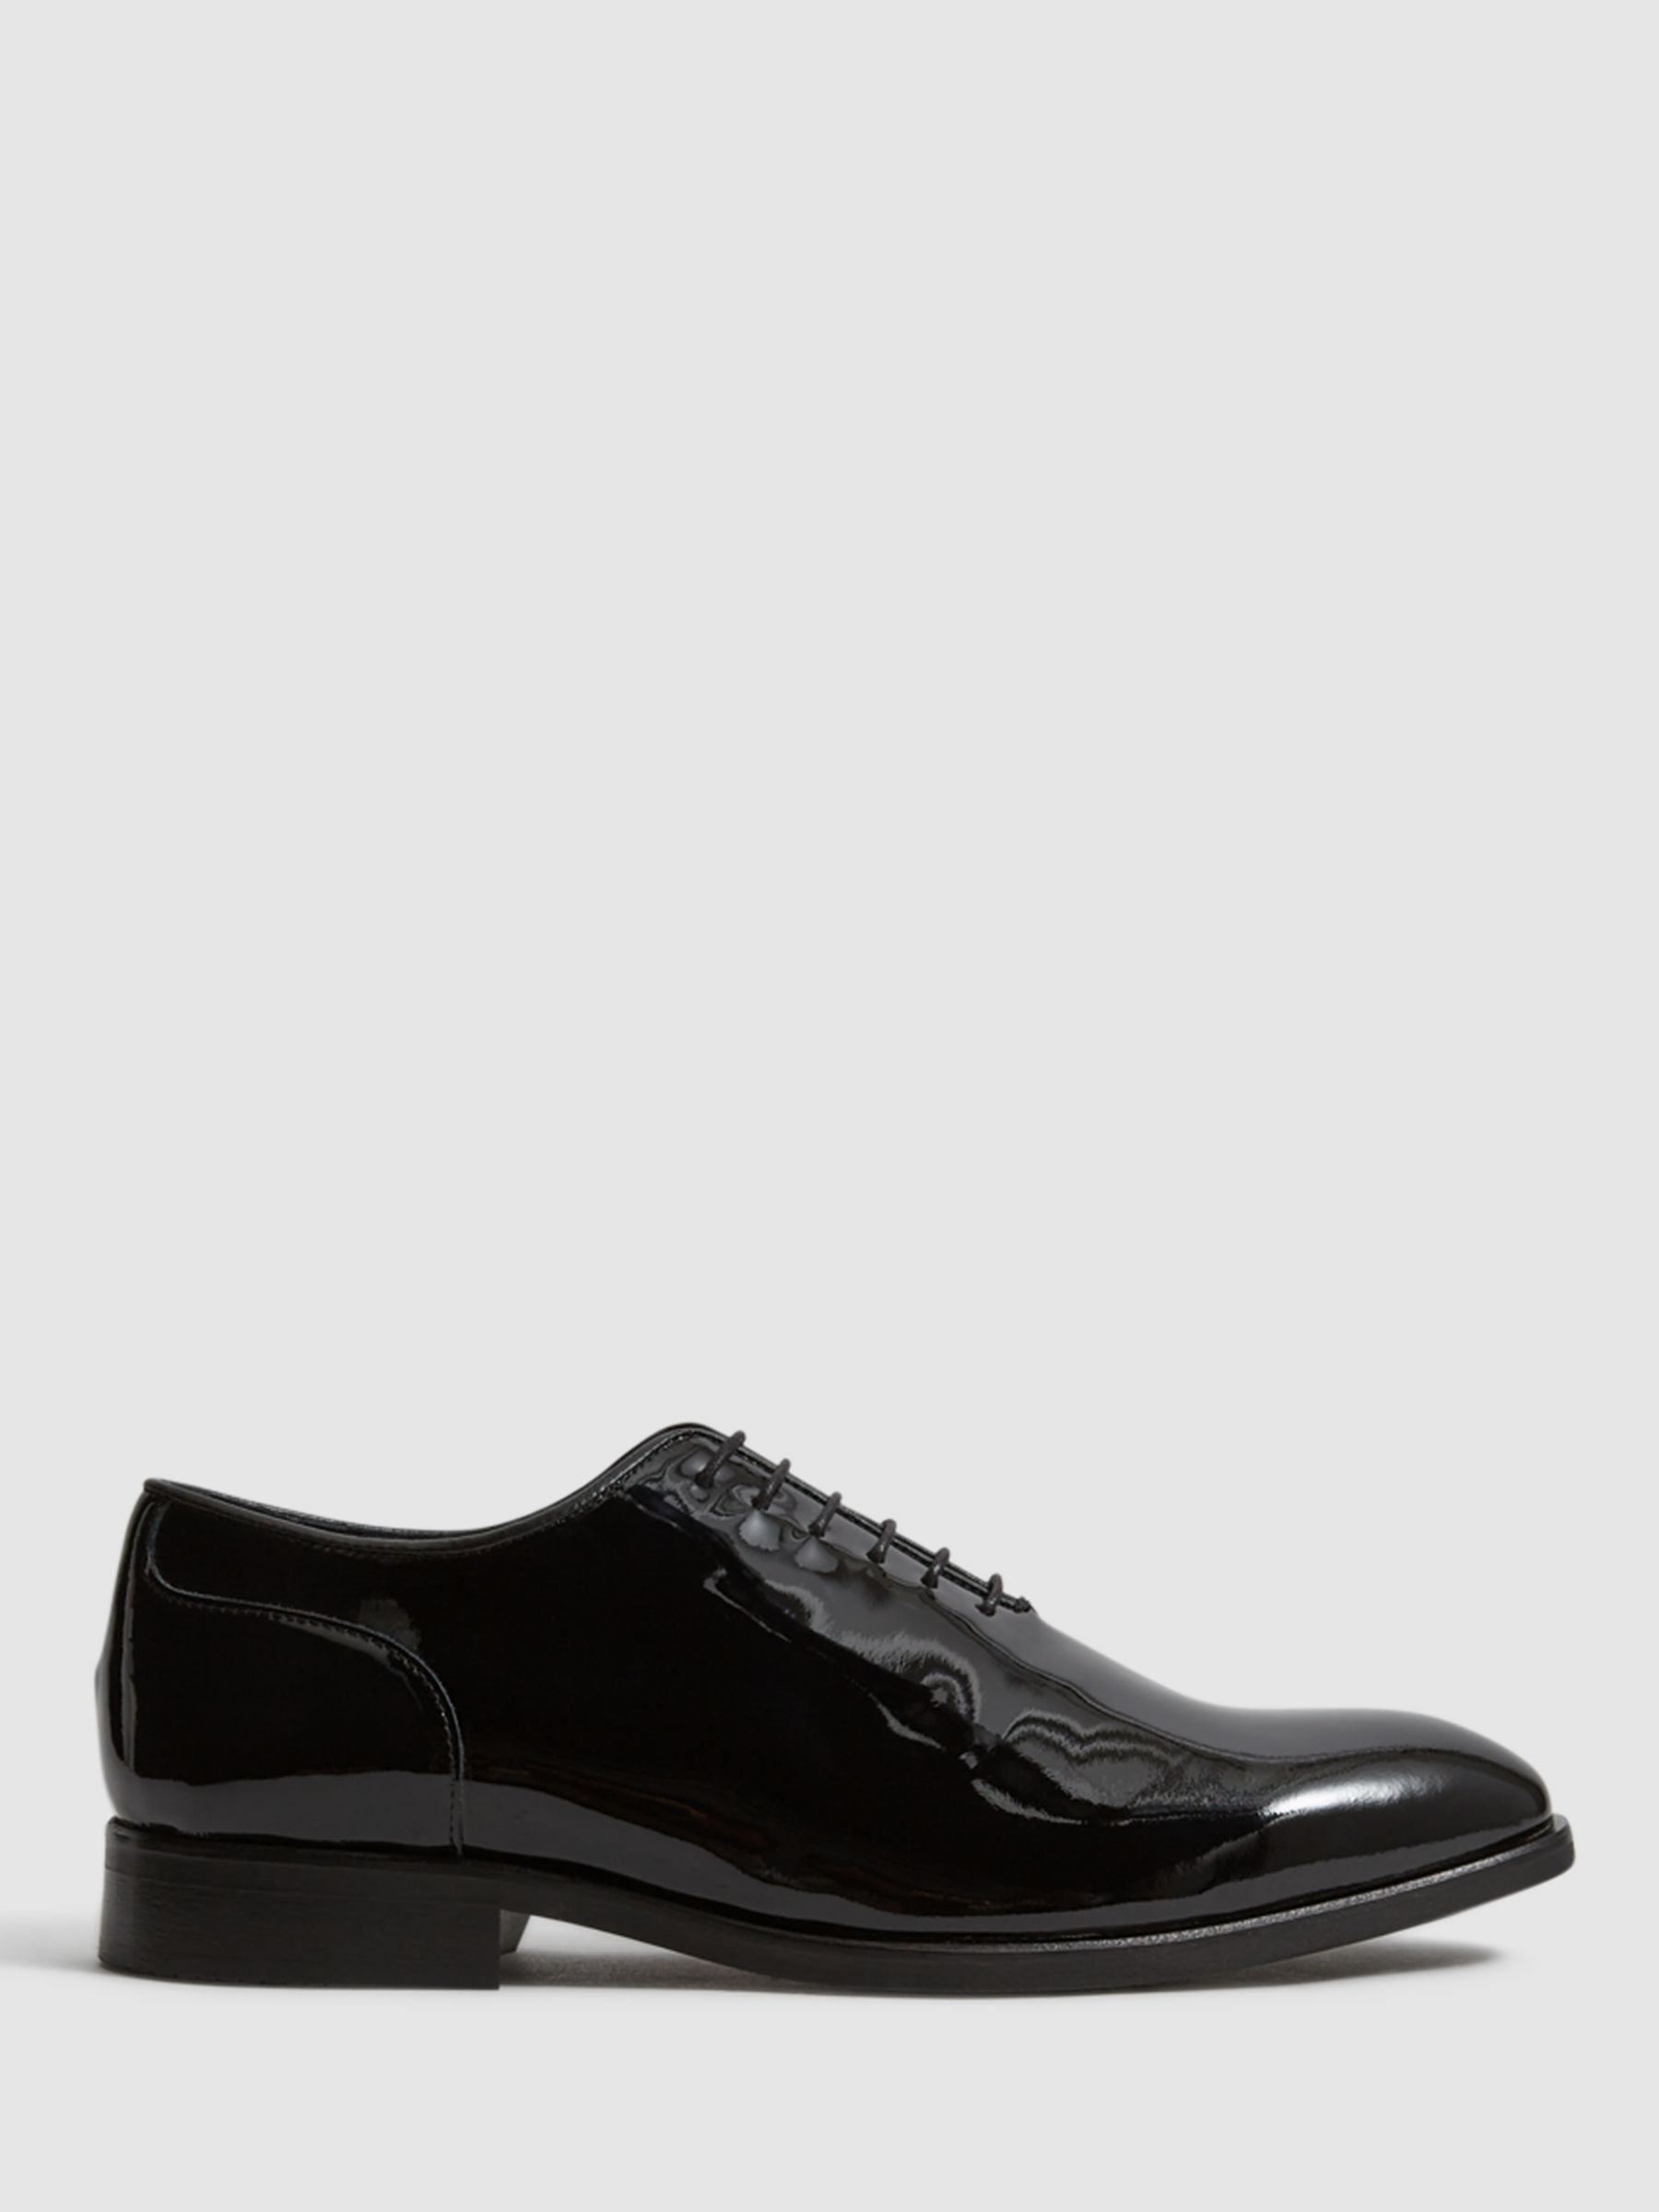 Reiss Bay Patent Leather Whole Cut Shoes, Black, 6